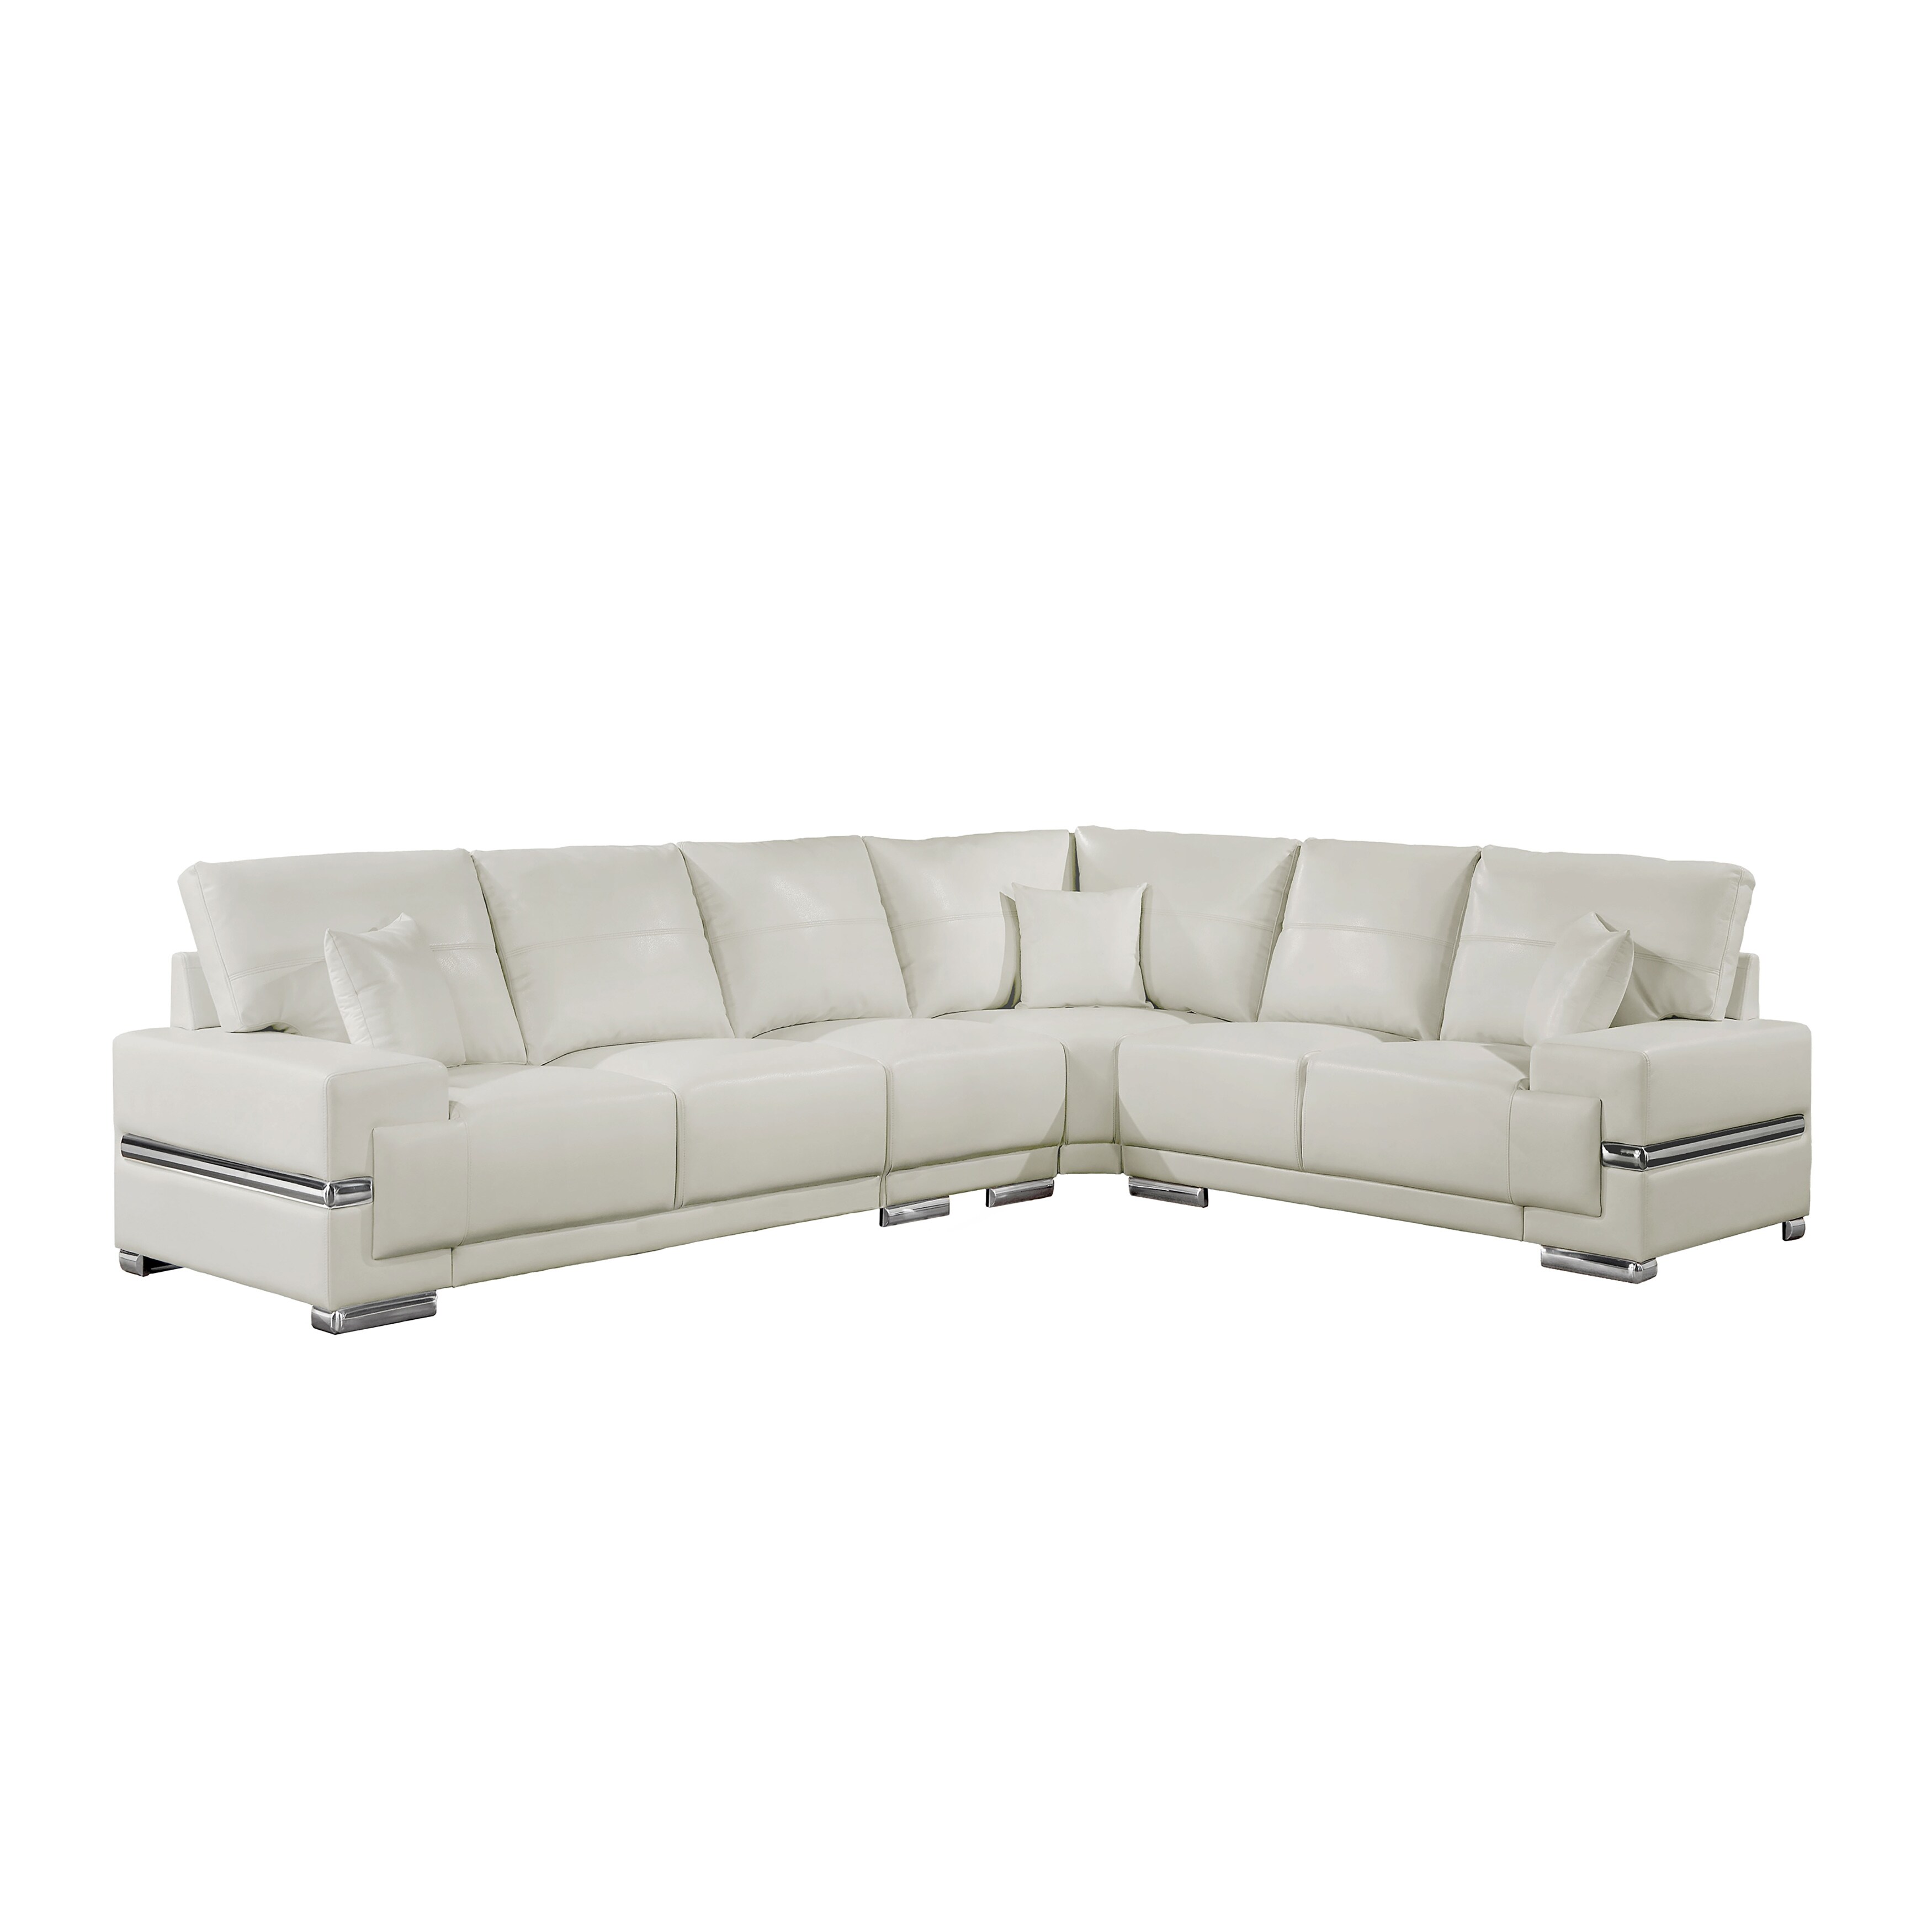 Leonara Contemporary White Faux Leather Large Sectional with Pillows by Furniture of America